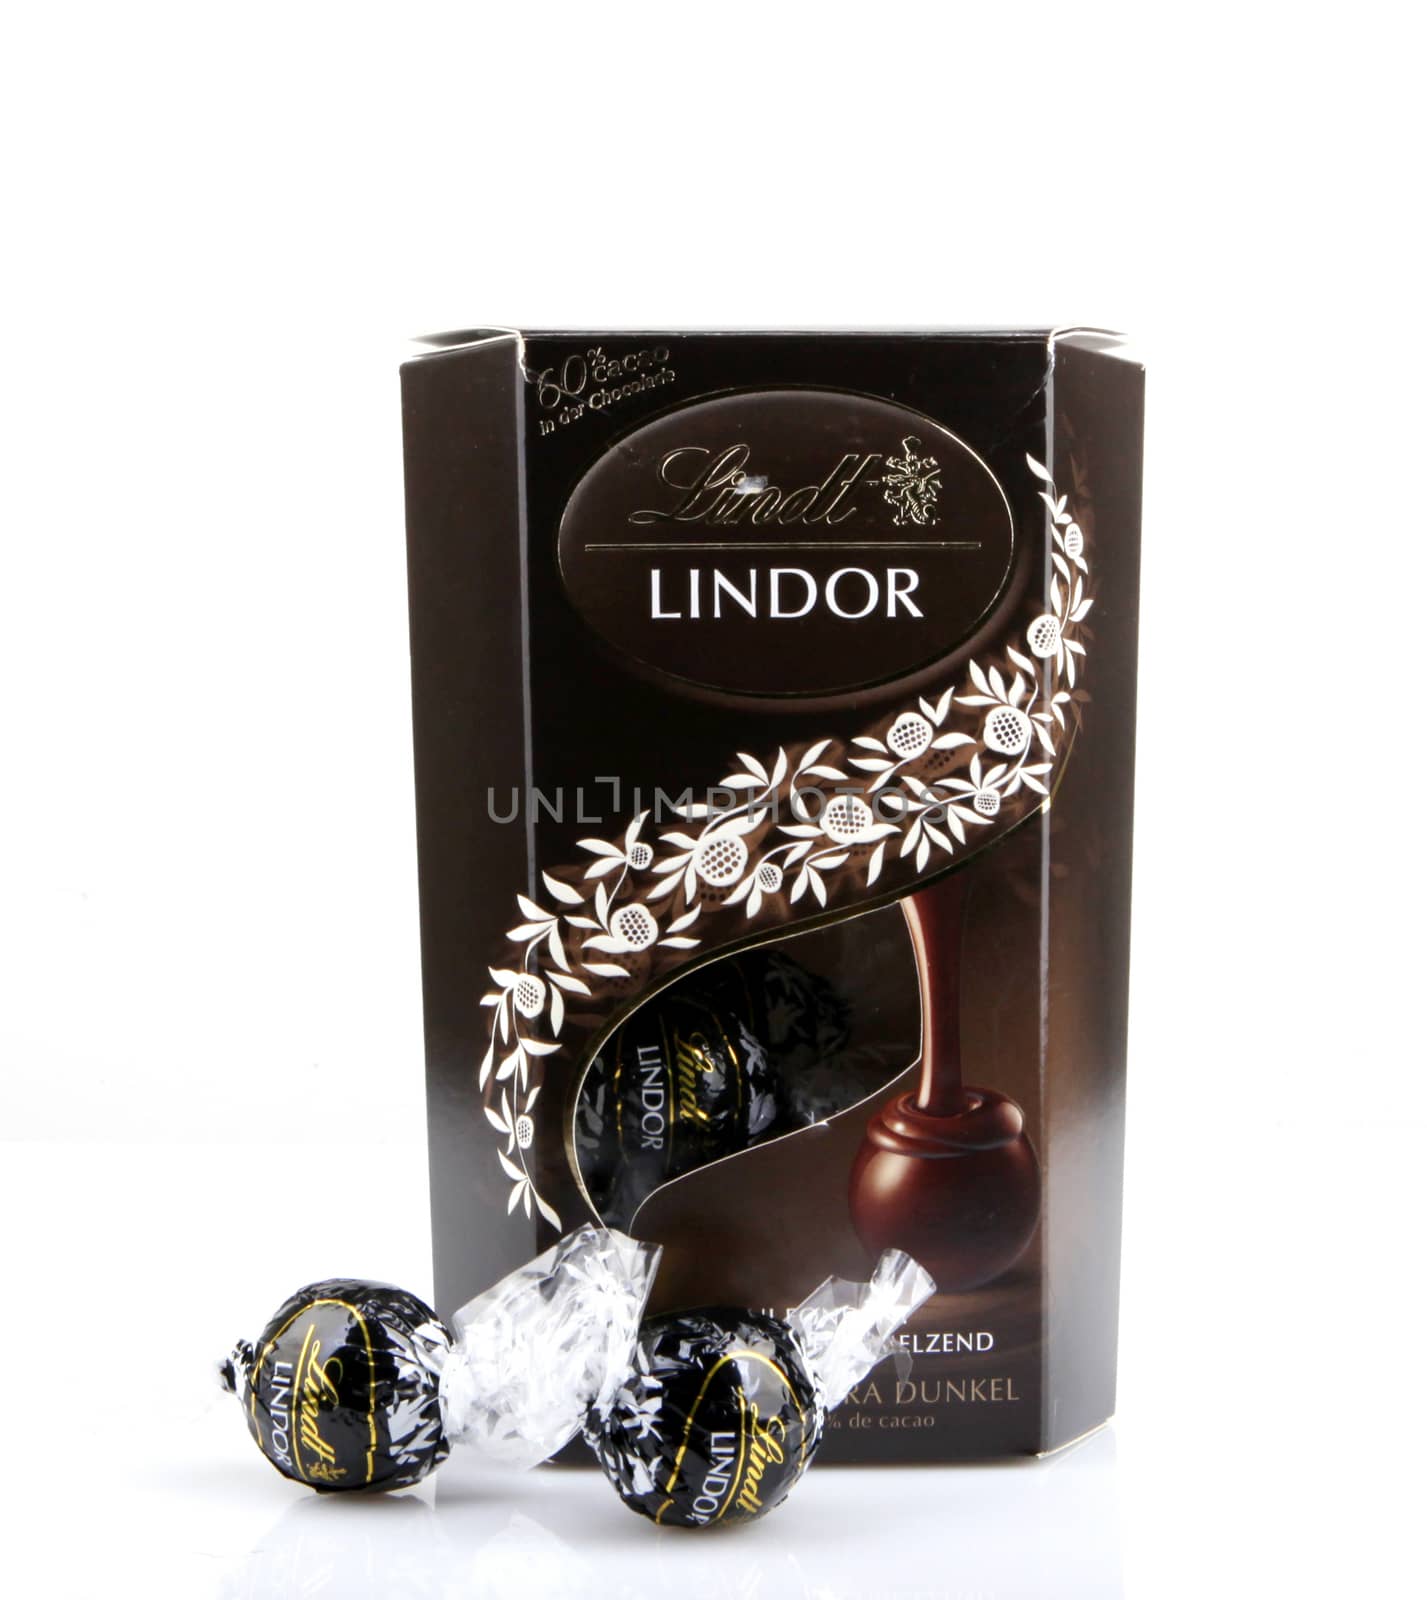 AYTOS, BULGARIA - APRIL 03, 2016: Milk Chocolate LINDOR truffle. Lindt is recognized as a leader in the market for premium quality chocolate.